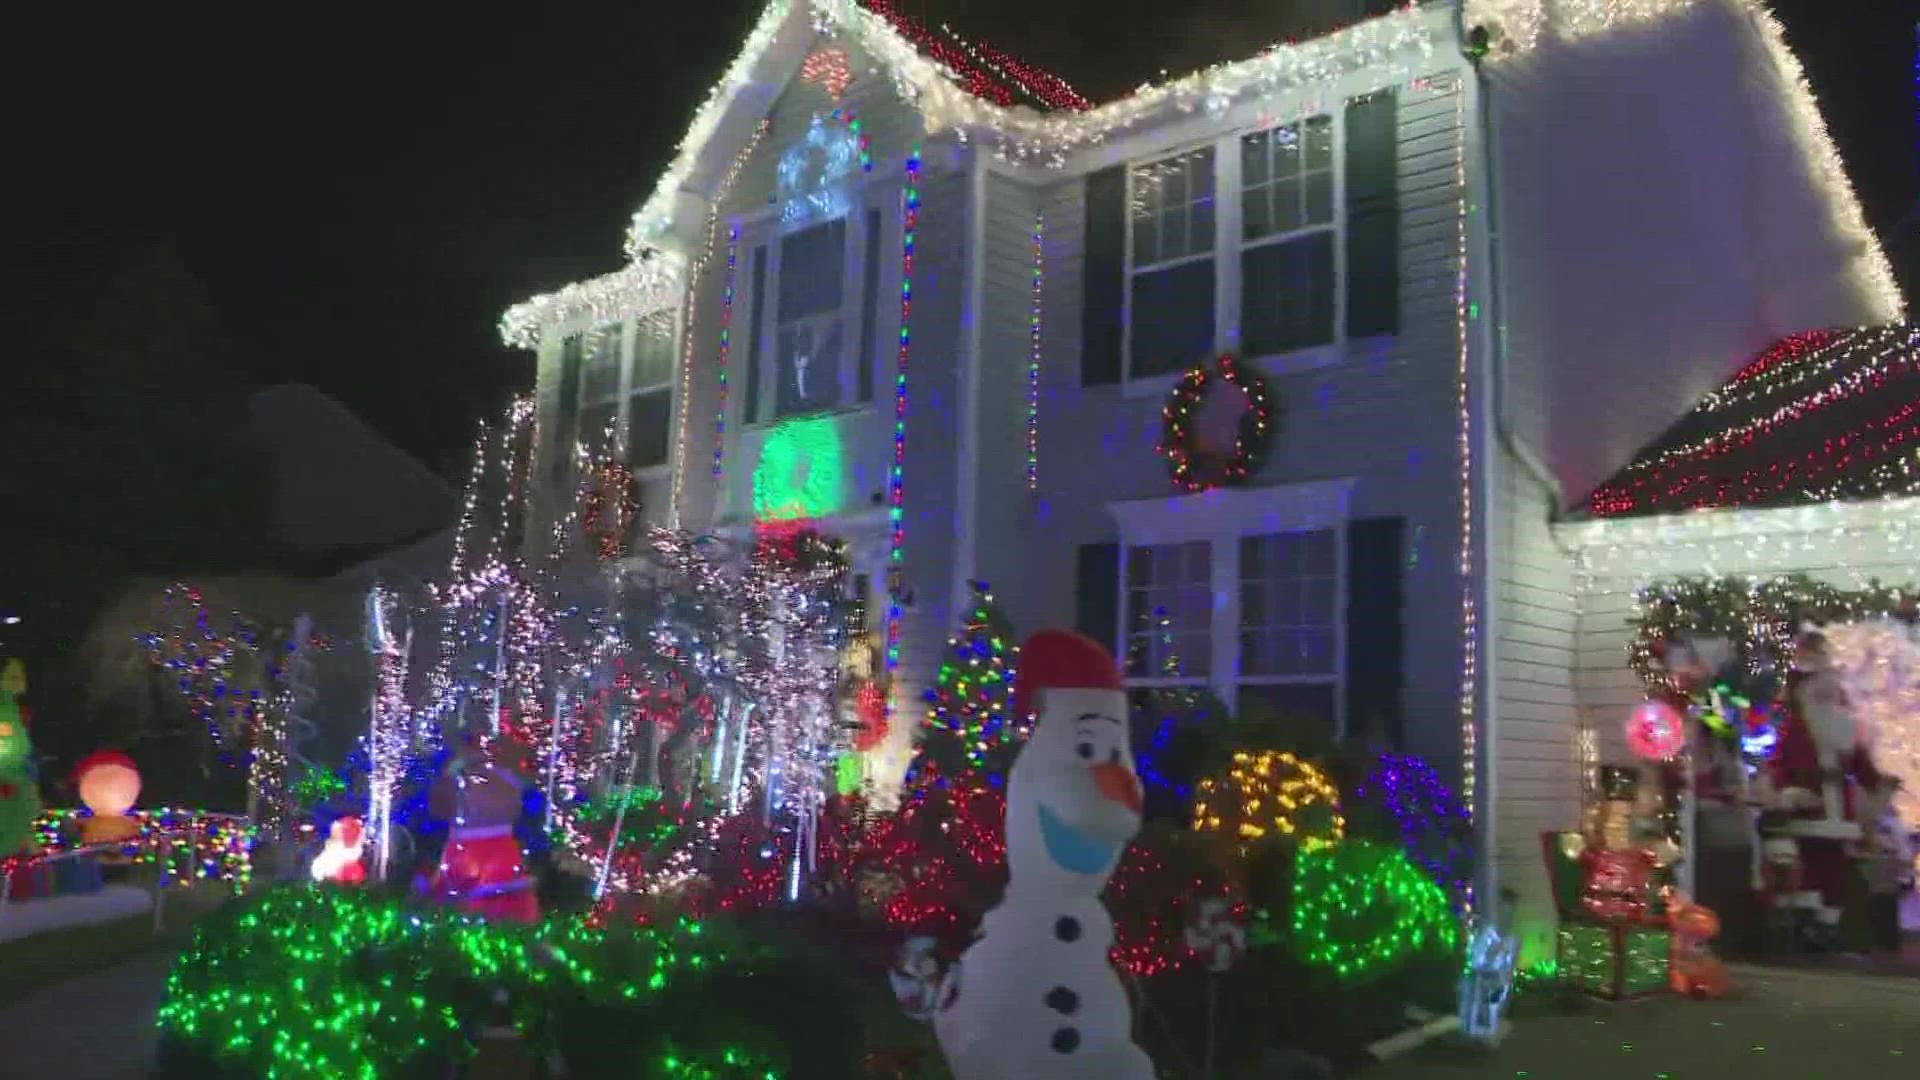 Check out this amazing Christmas display in the 34900 block of Cambridge Drive in North Ridgeville.